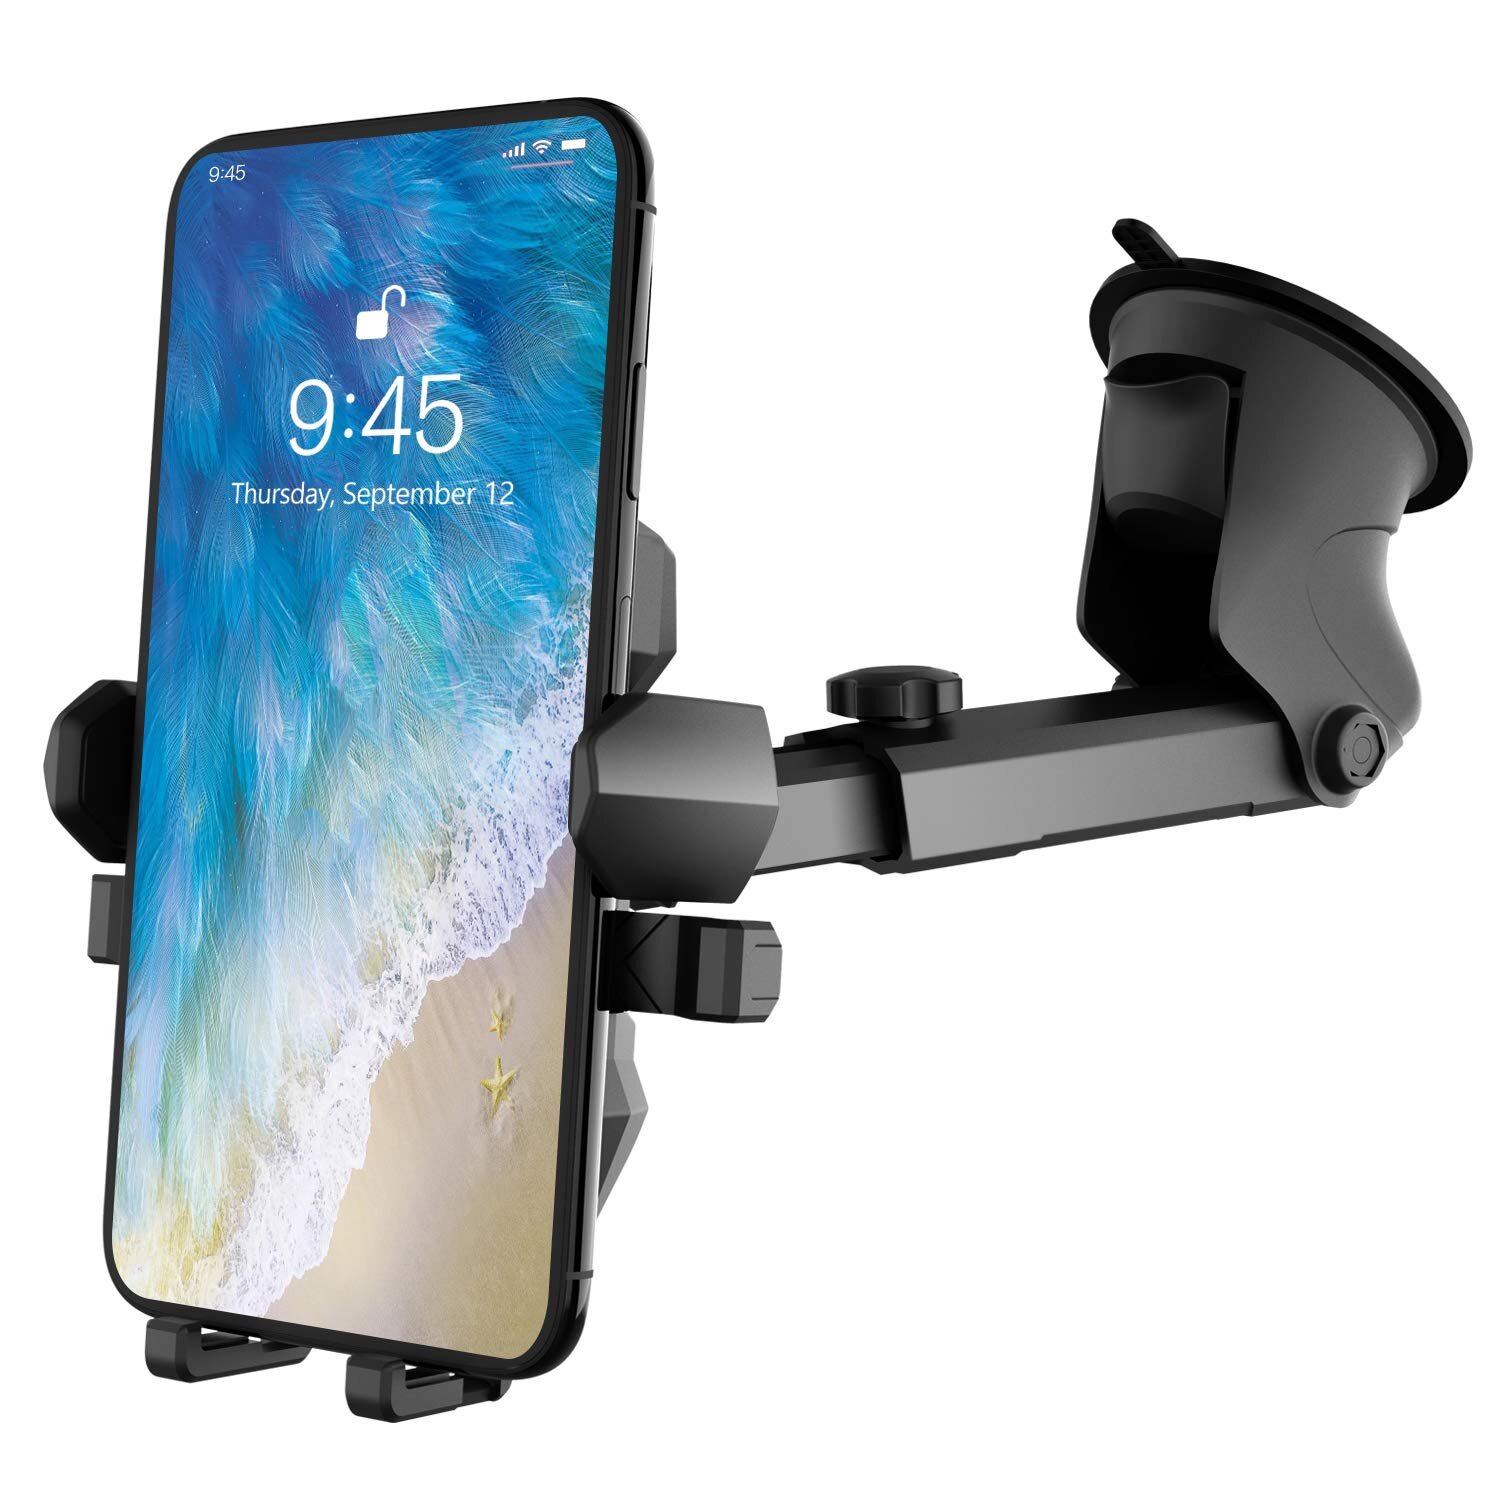 Car Phone Mount,Universal Smartphone Car Air Vent Mount Holder Cradle for iPhone Xs XS Max XR X 8 8 Plus 7 7 Plus SE 6s 6 Plus 6 5s 5 4s 4 Samsung Galaxy S6 S5 S4 LG Nexus Sony and More 